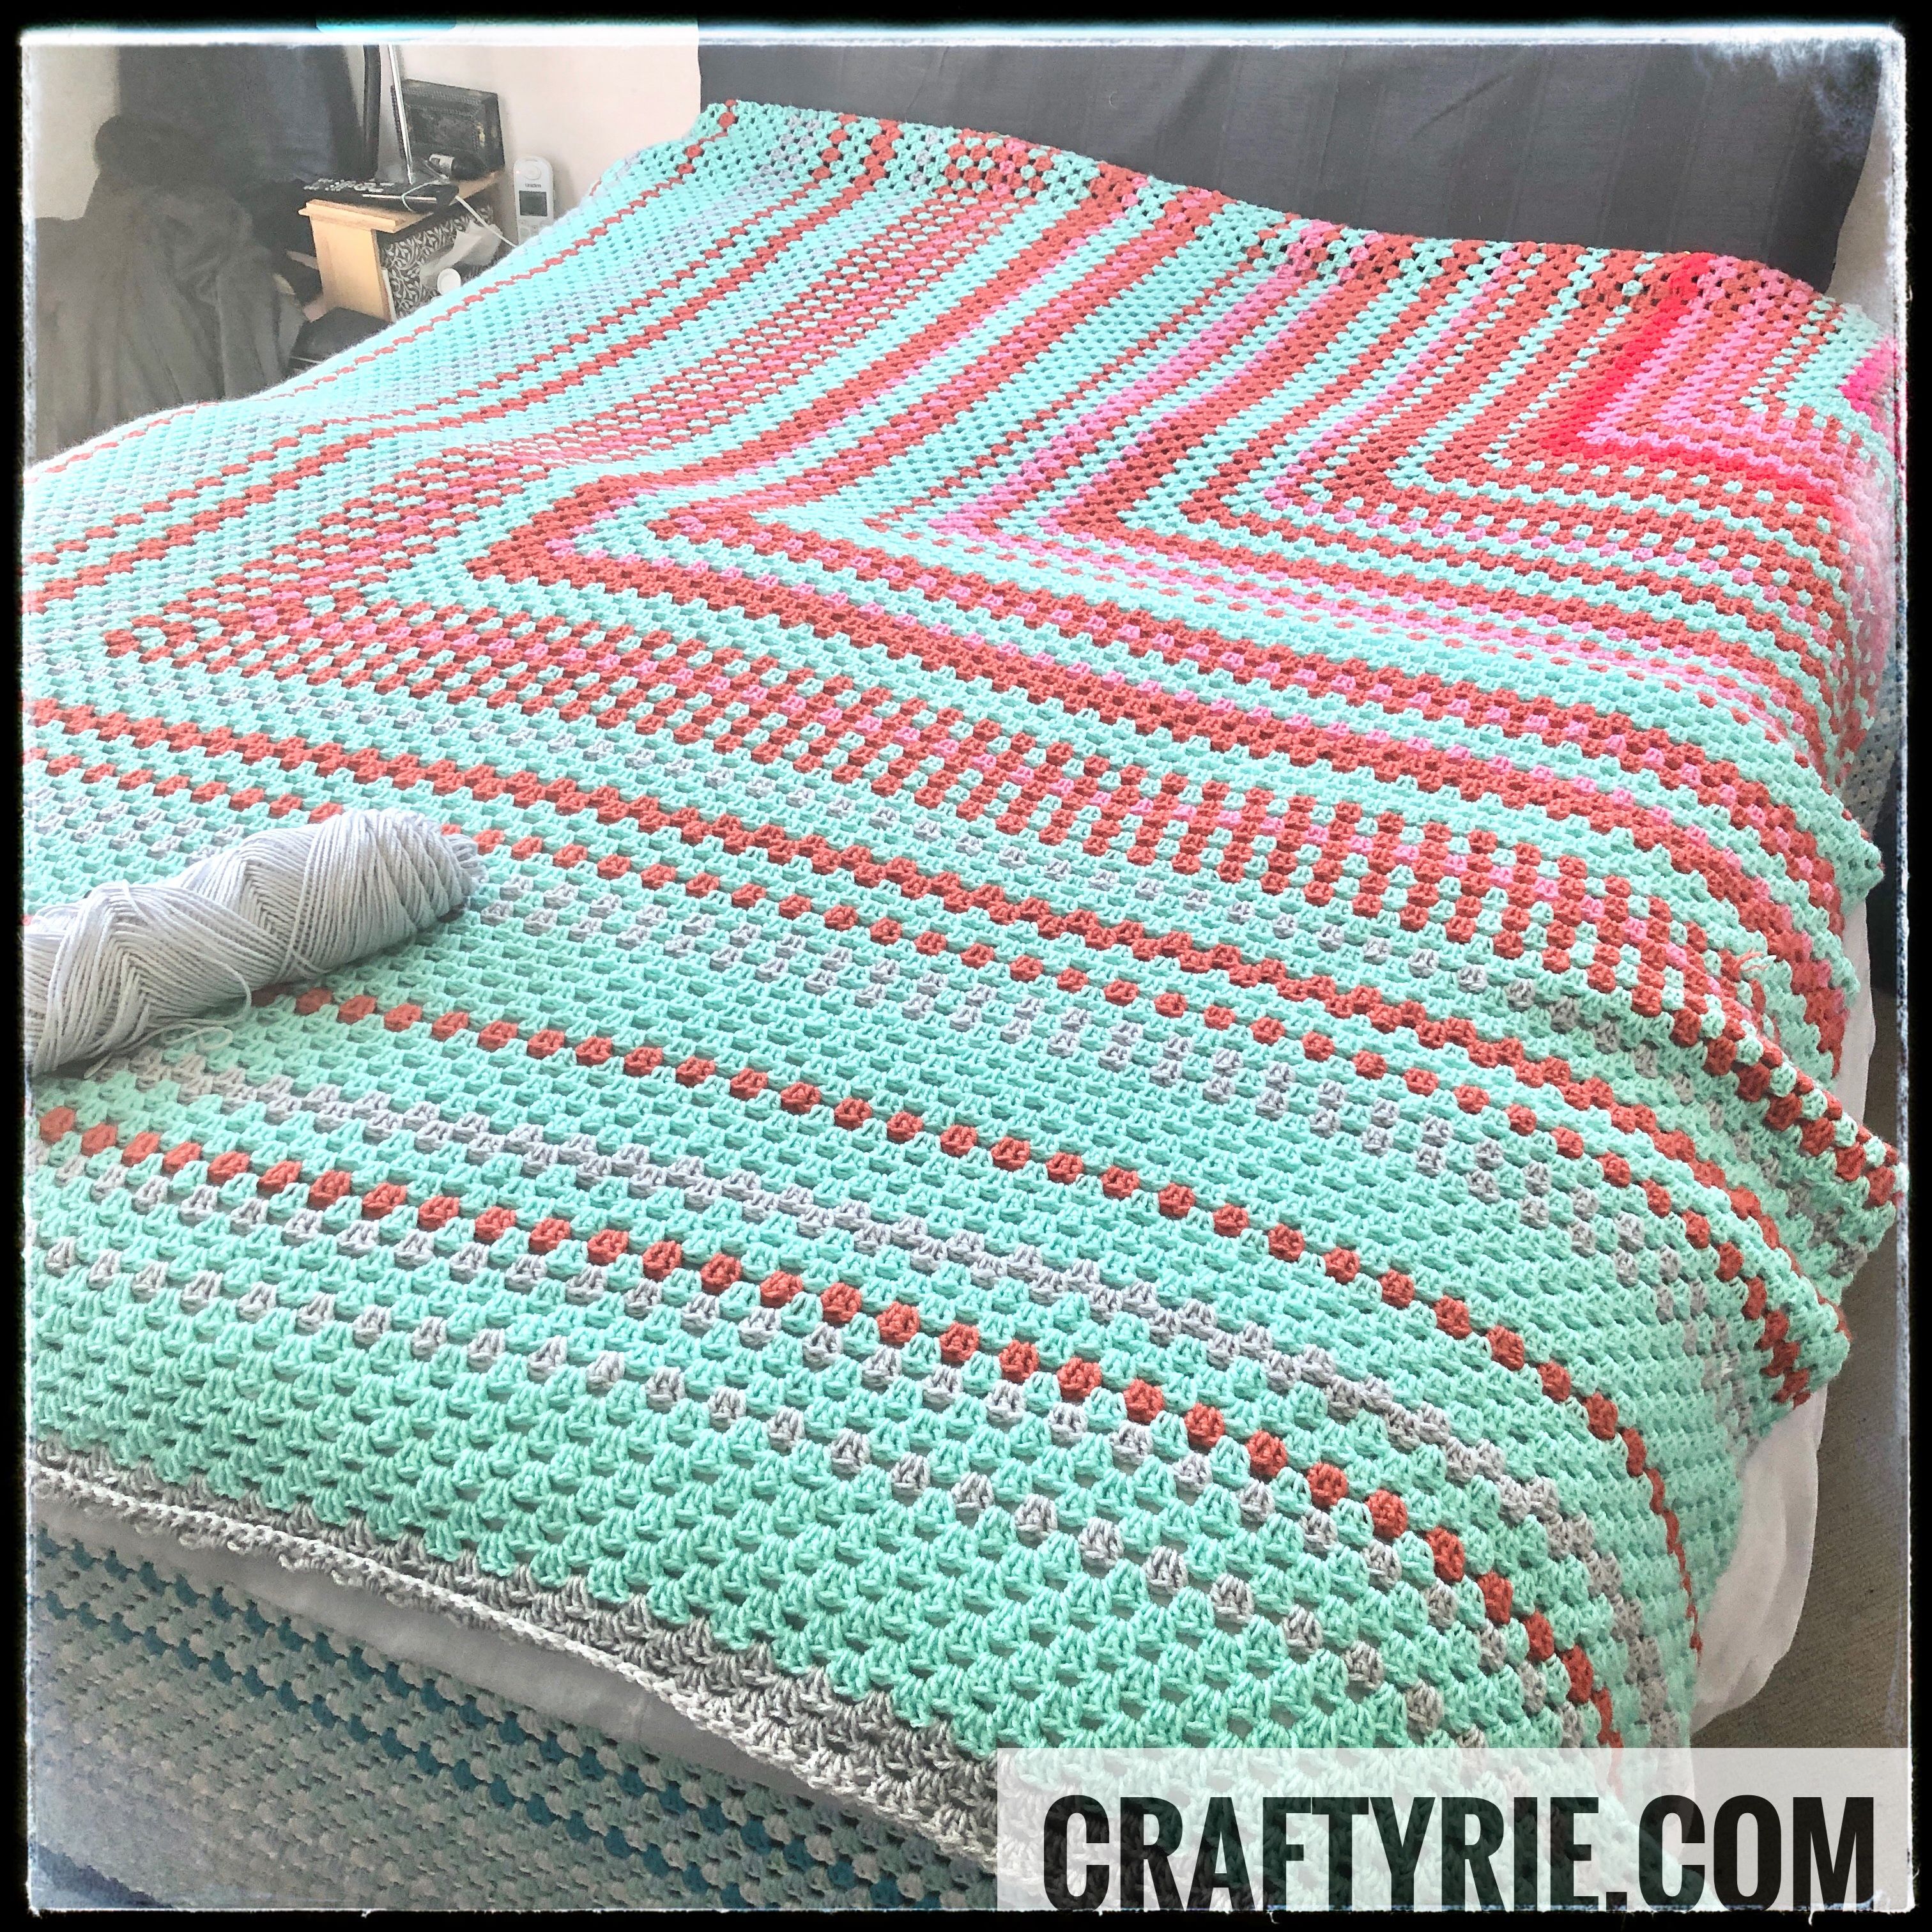 A blanket made from yarn from collab.